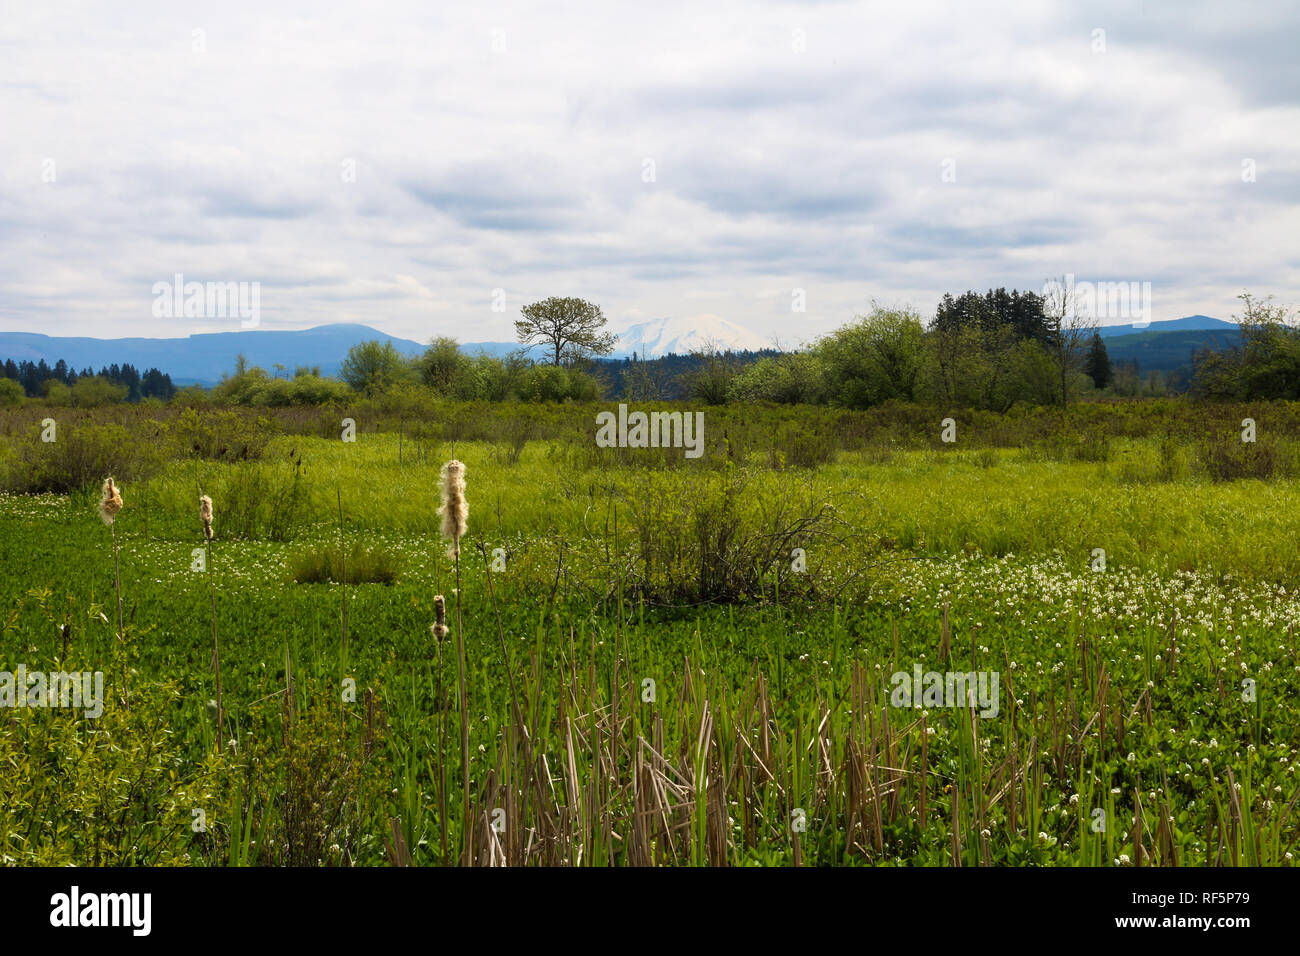 Mount St Helens National Volcanic Monument Coldwater Lake grassy area dense with overgrowth Stock Photo